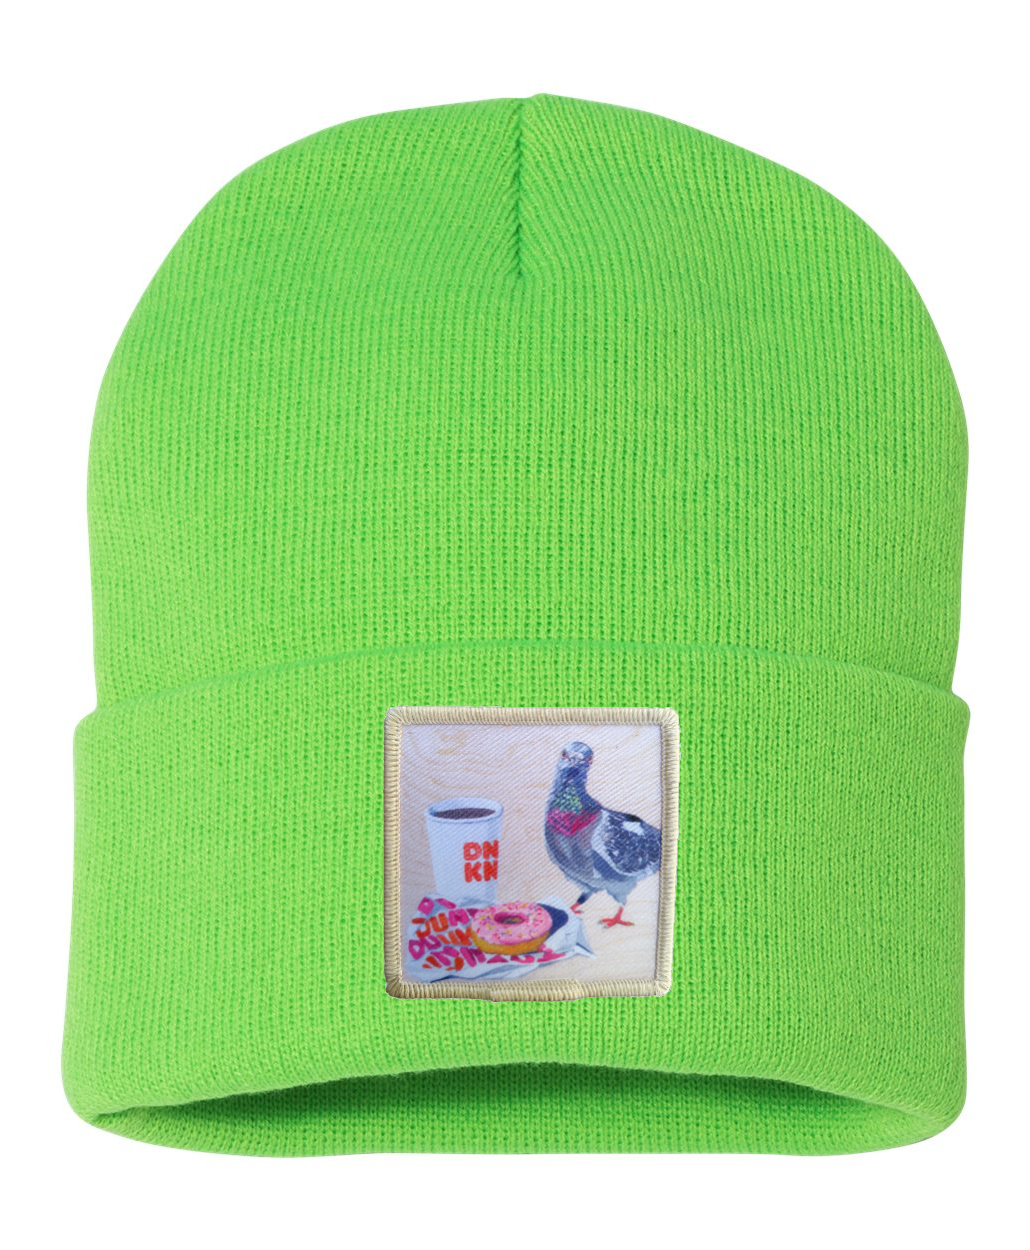 Pigeons Run on Donuts Beanie Hats Flyn Costello Neon Green  